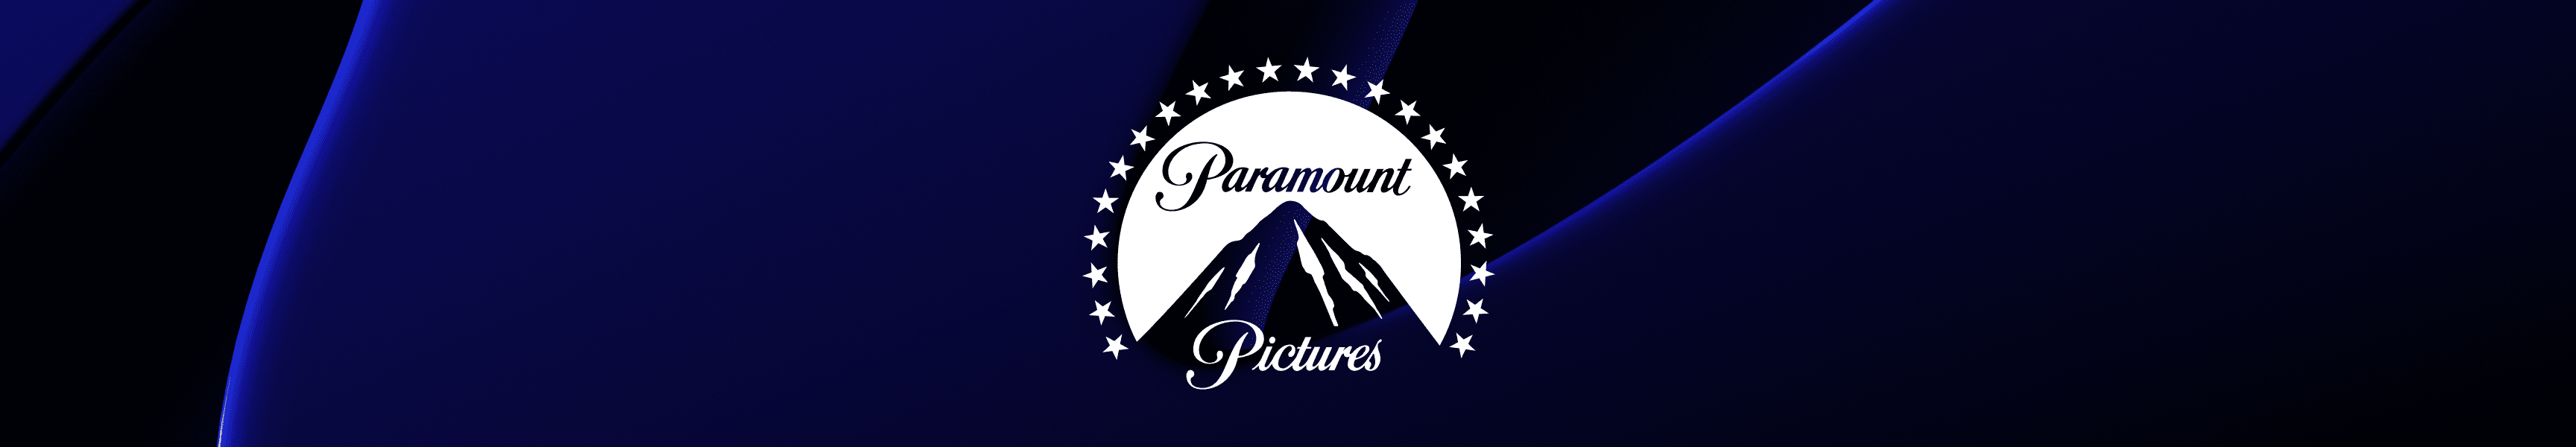 Paramount Pictures Wall Art